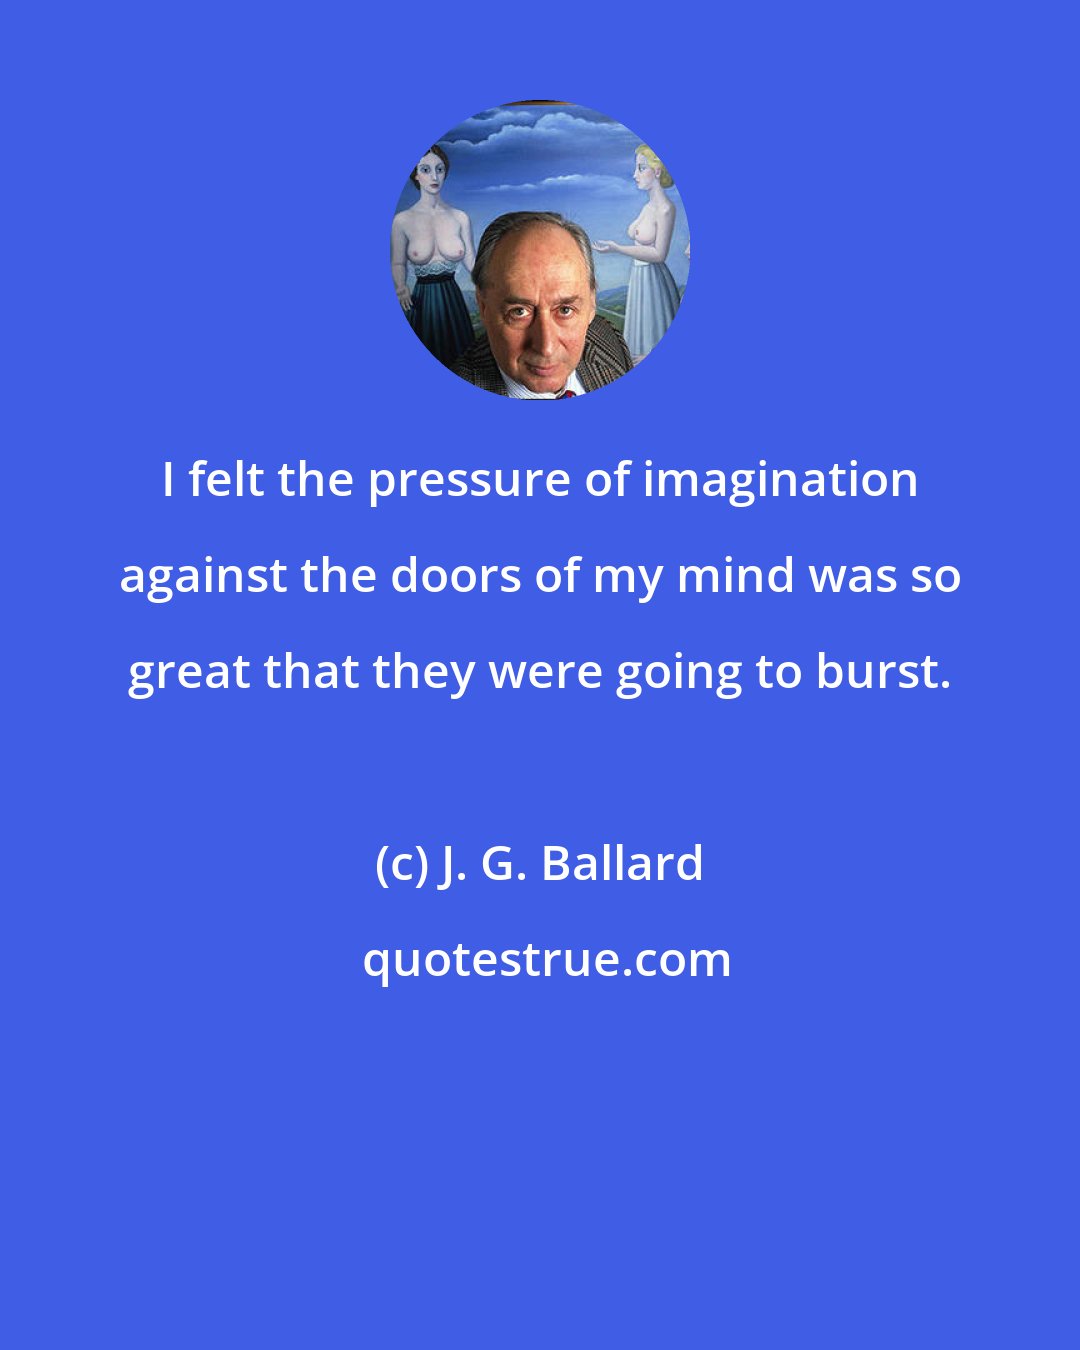 J. G. Ballard: I felt the pressure of imagination against the doors of my mind was so great that they were going to burst.